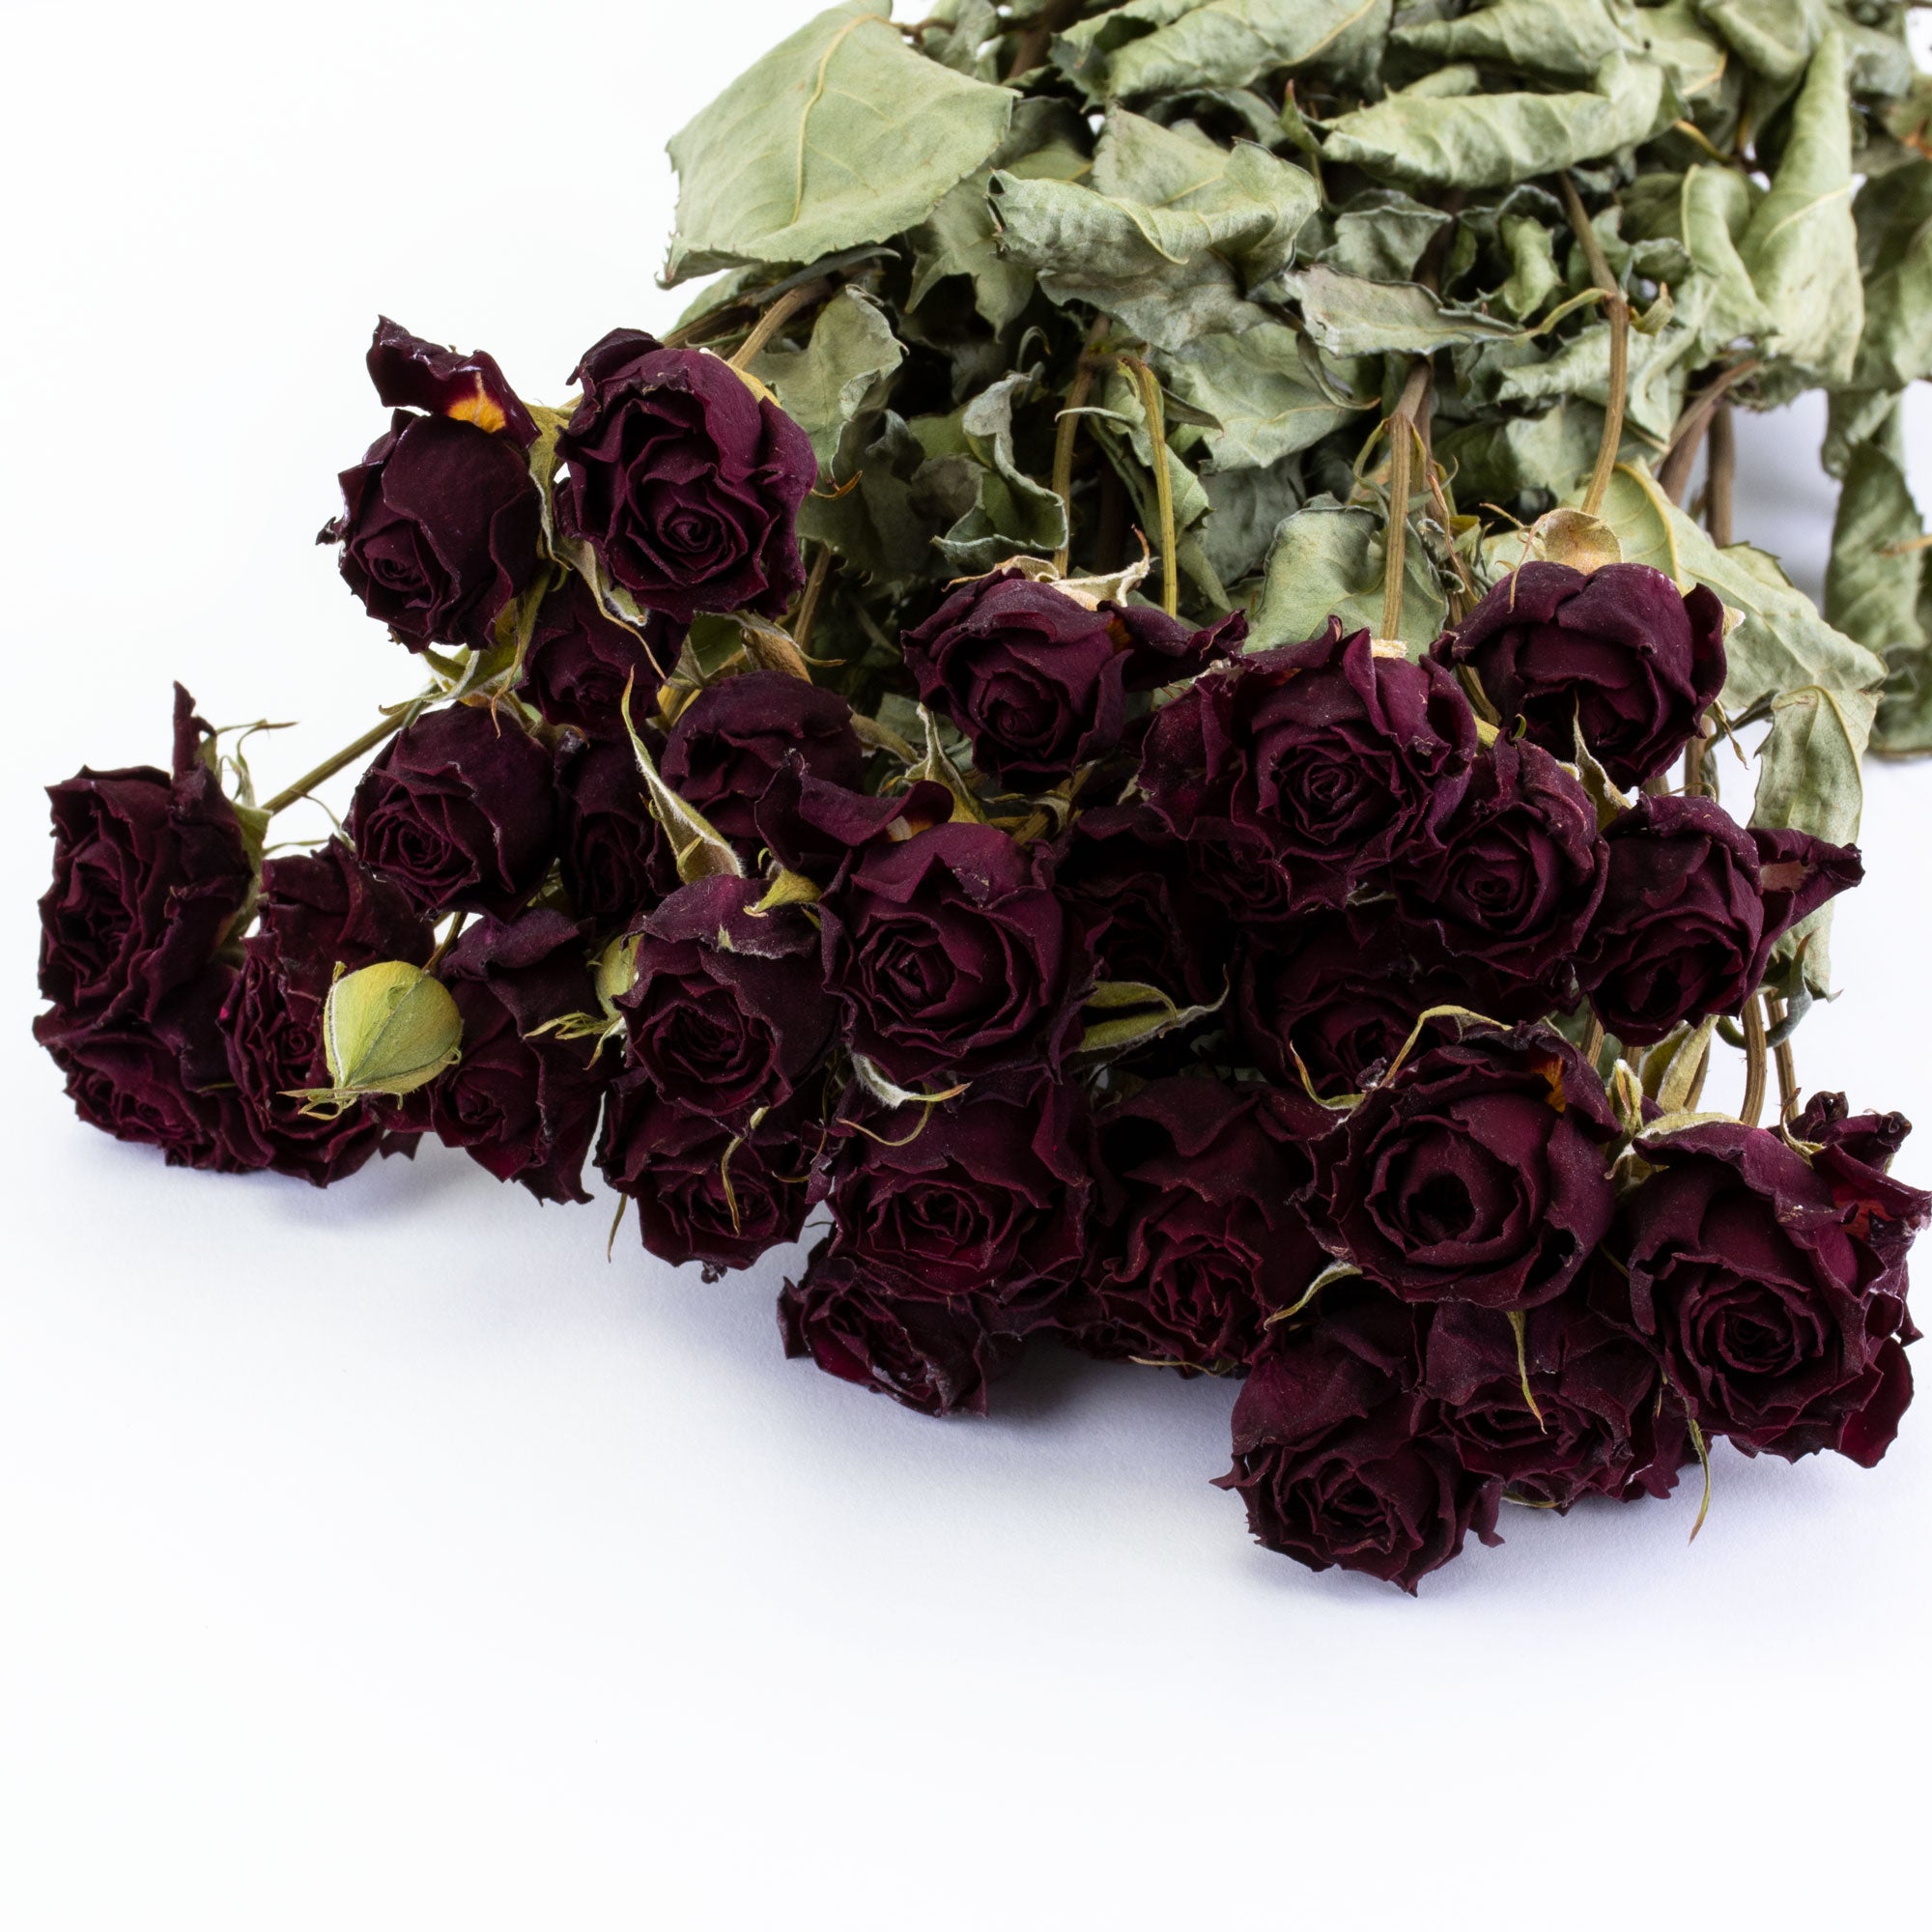 This image shows a bunch of dark red spray roses, against a white background